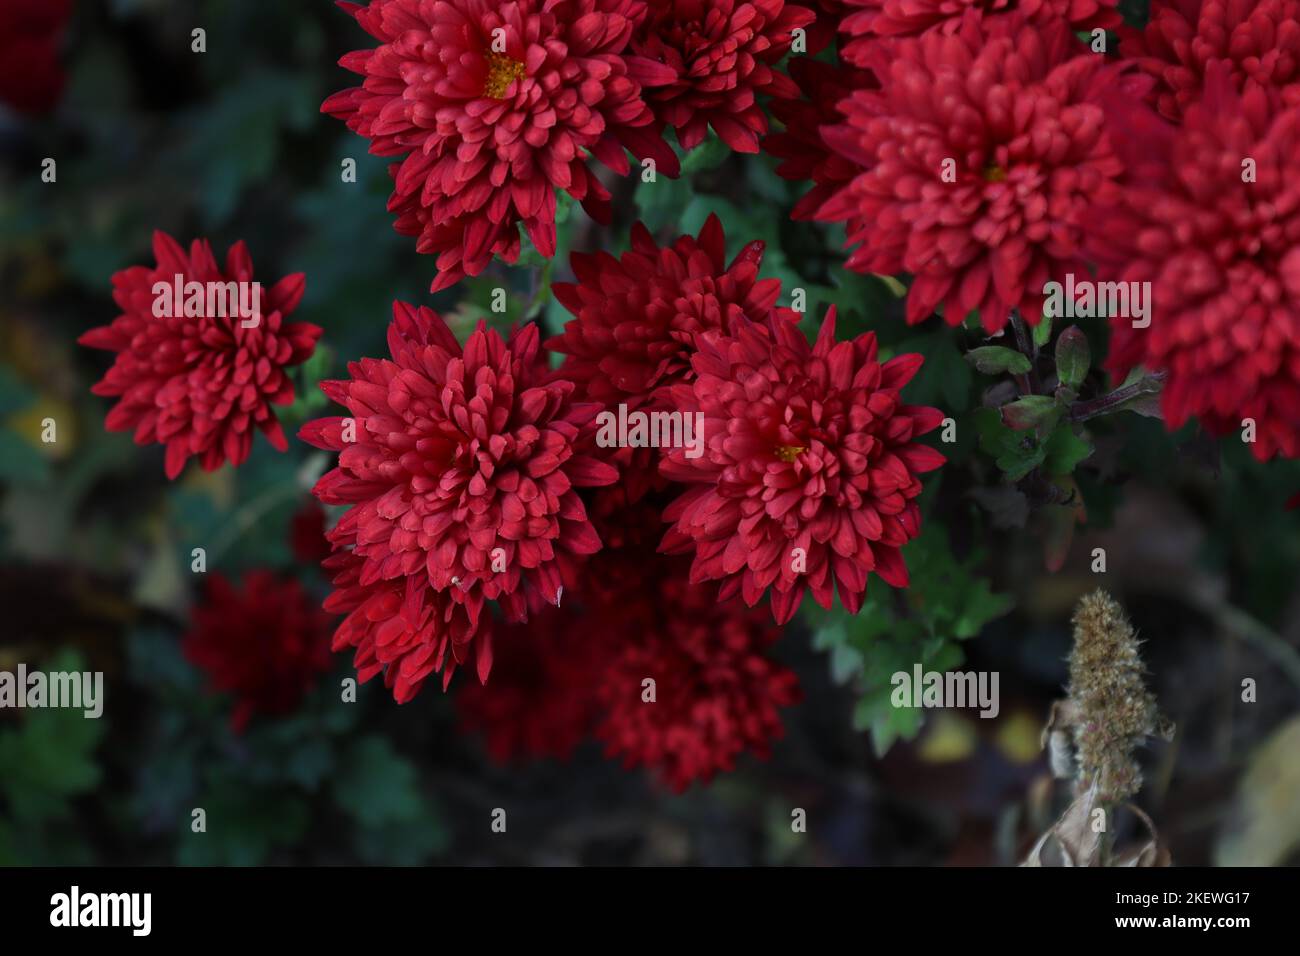 Bouquet of red chrysanthemums caught in a local garden in late autumn Stock Photo